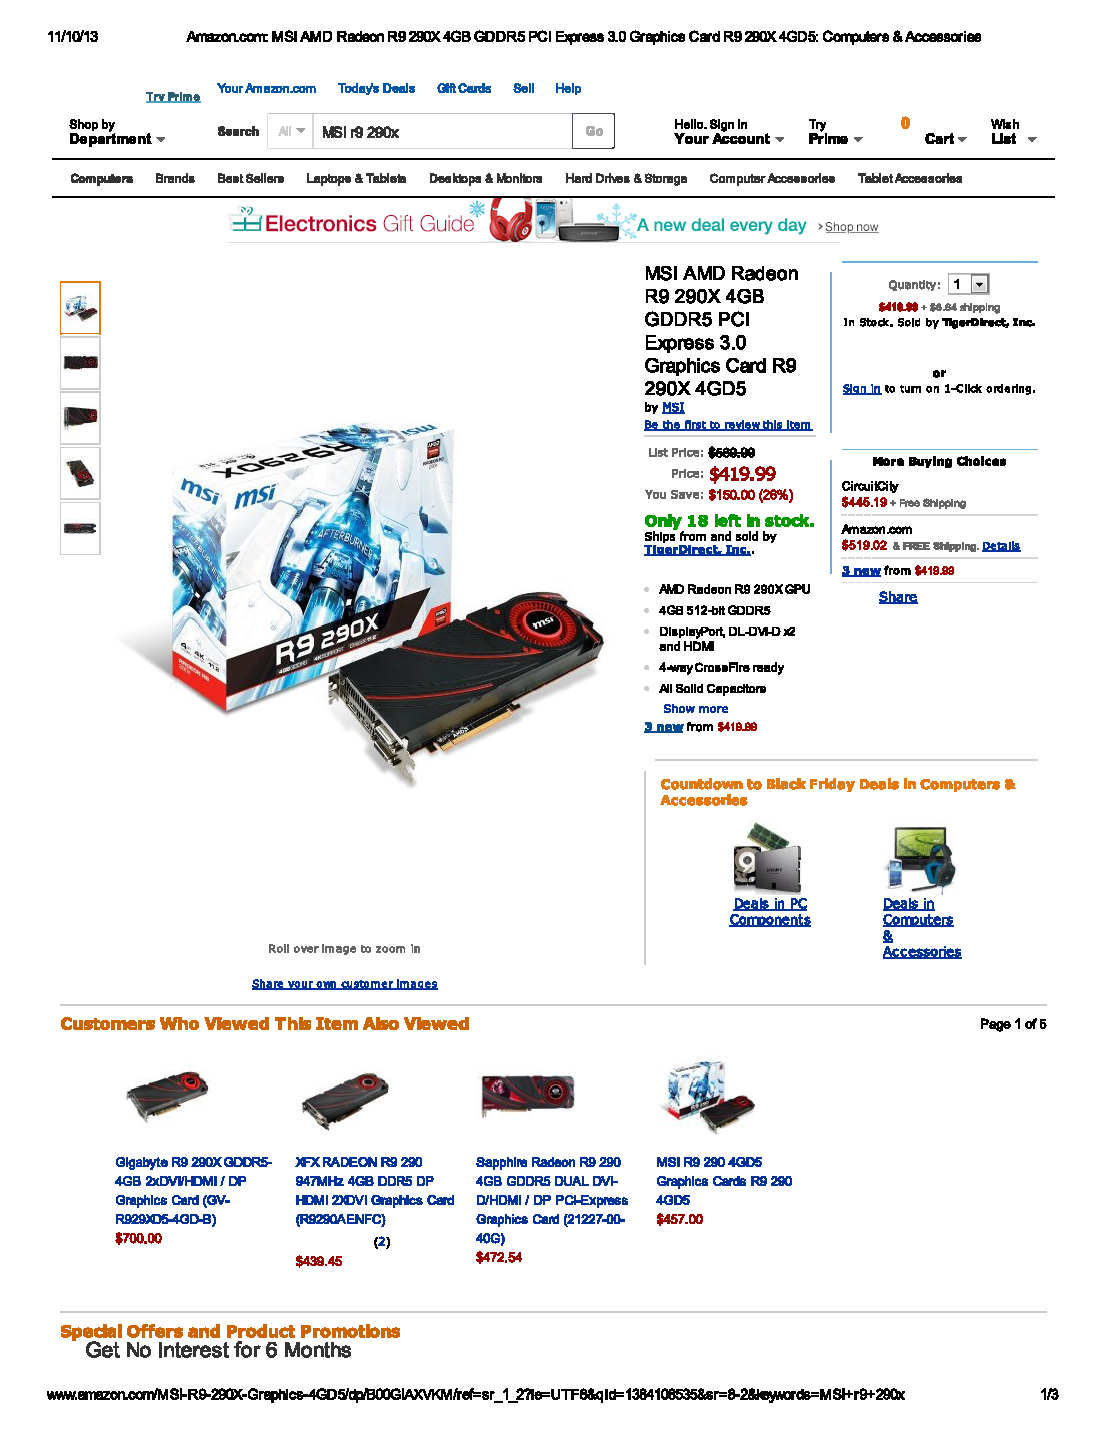 TigerDirect Advertisement on Amazon at time of purchase pg1